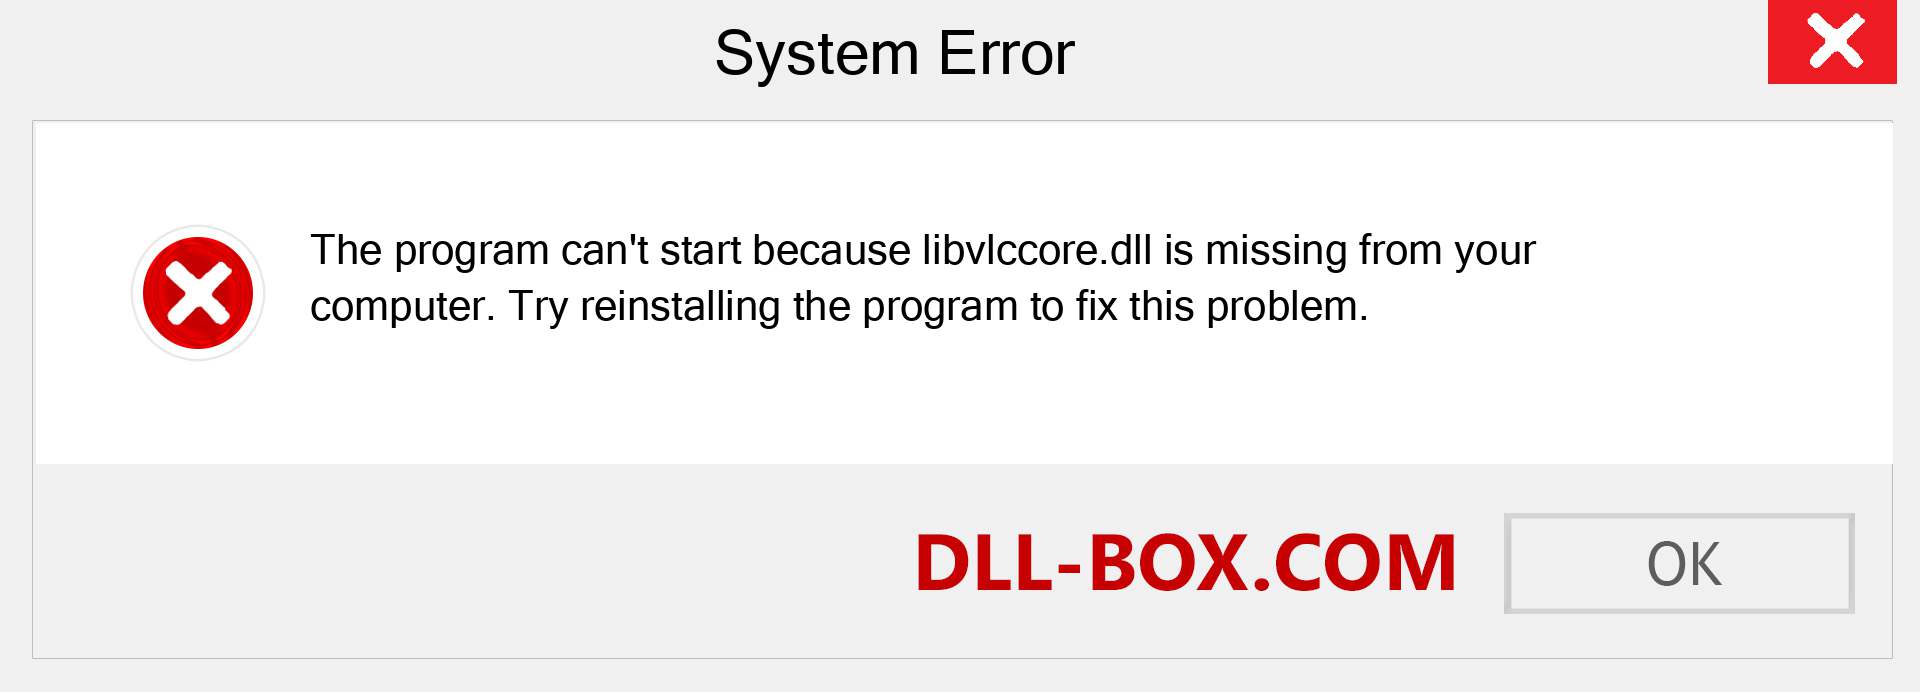  libvlccore.dll file is missing?. Download for Windows 7, 8, 10 - Fix  libvlccore dll Missing Error on Windows, photos, images